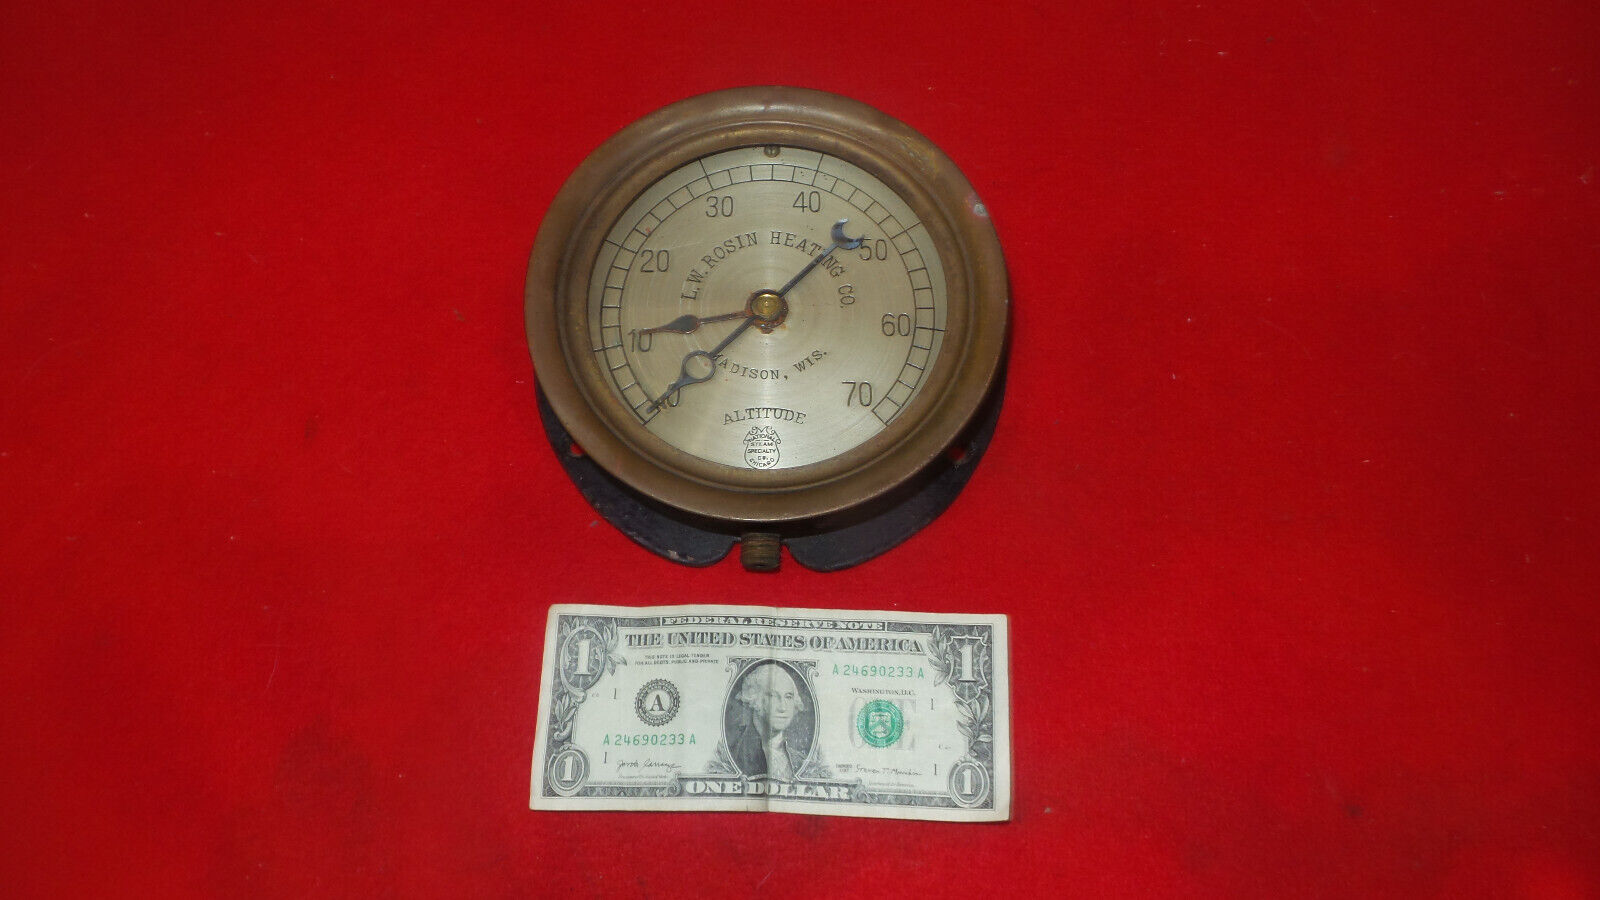 Vintage National Steam Specialty Altitude Gage W/Advertising